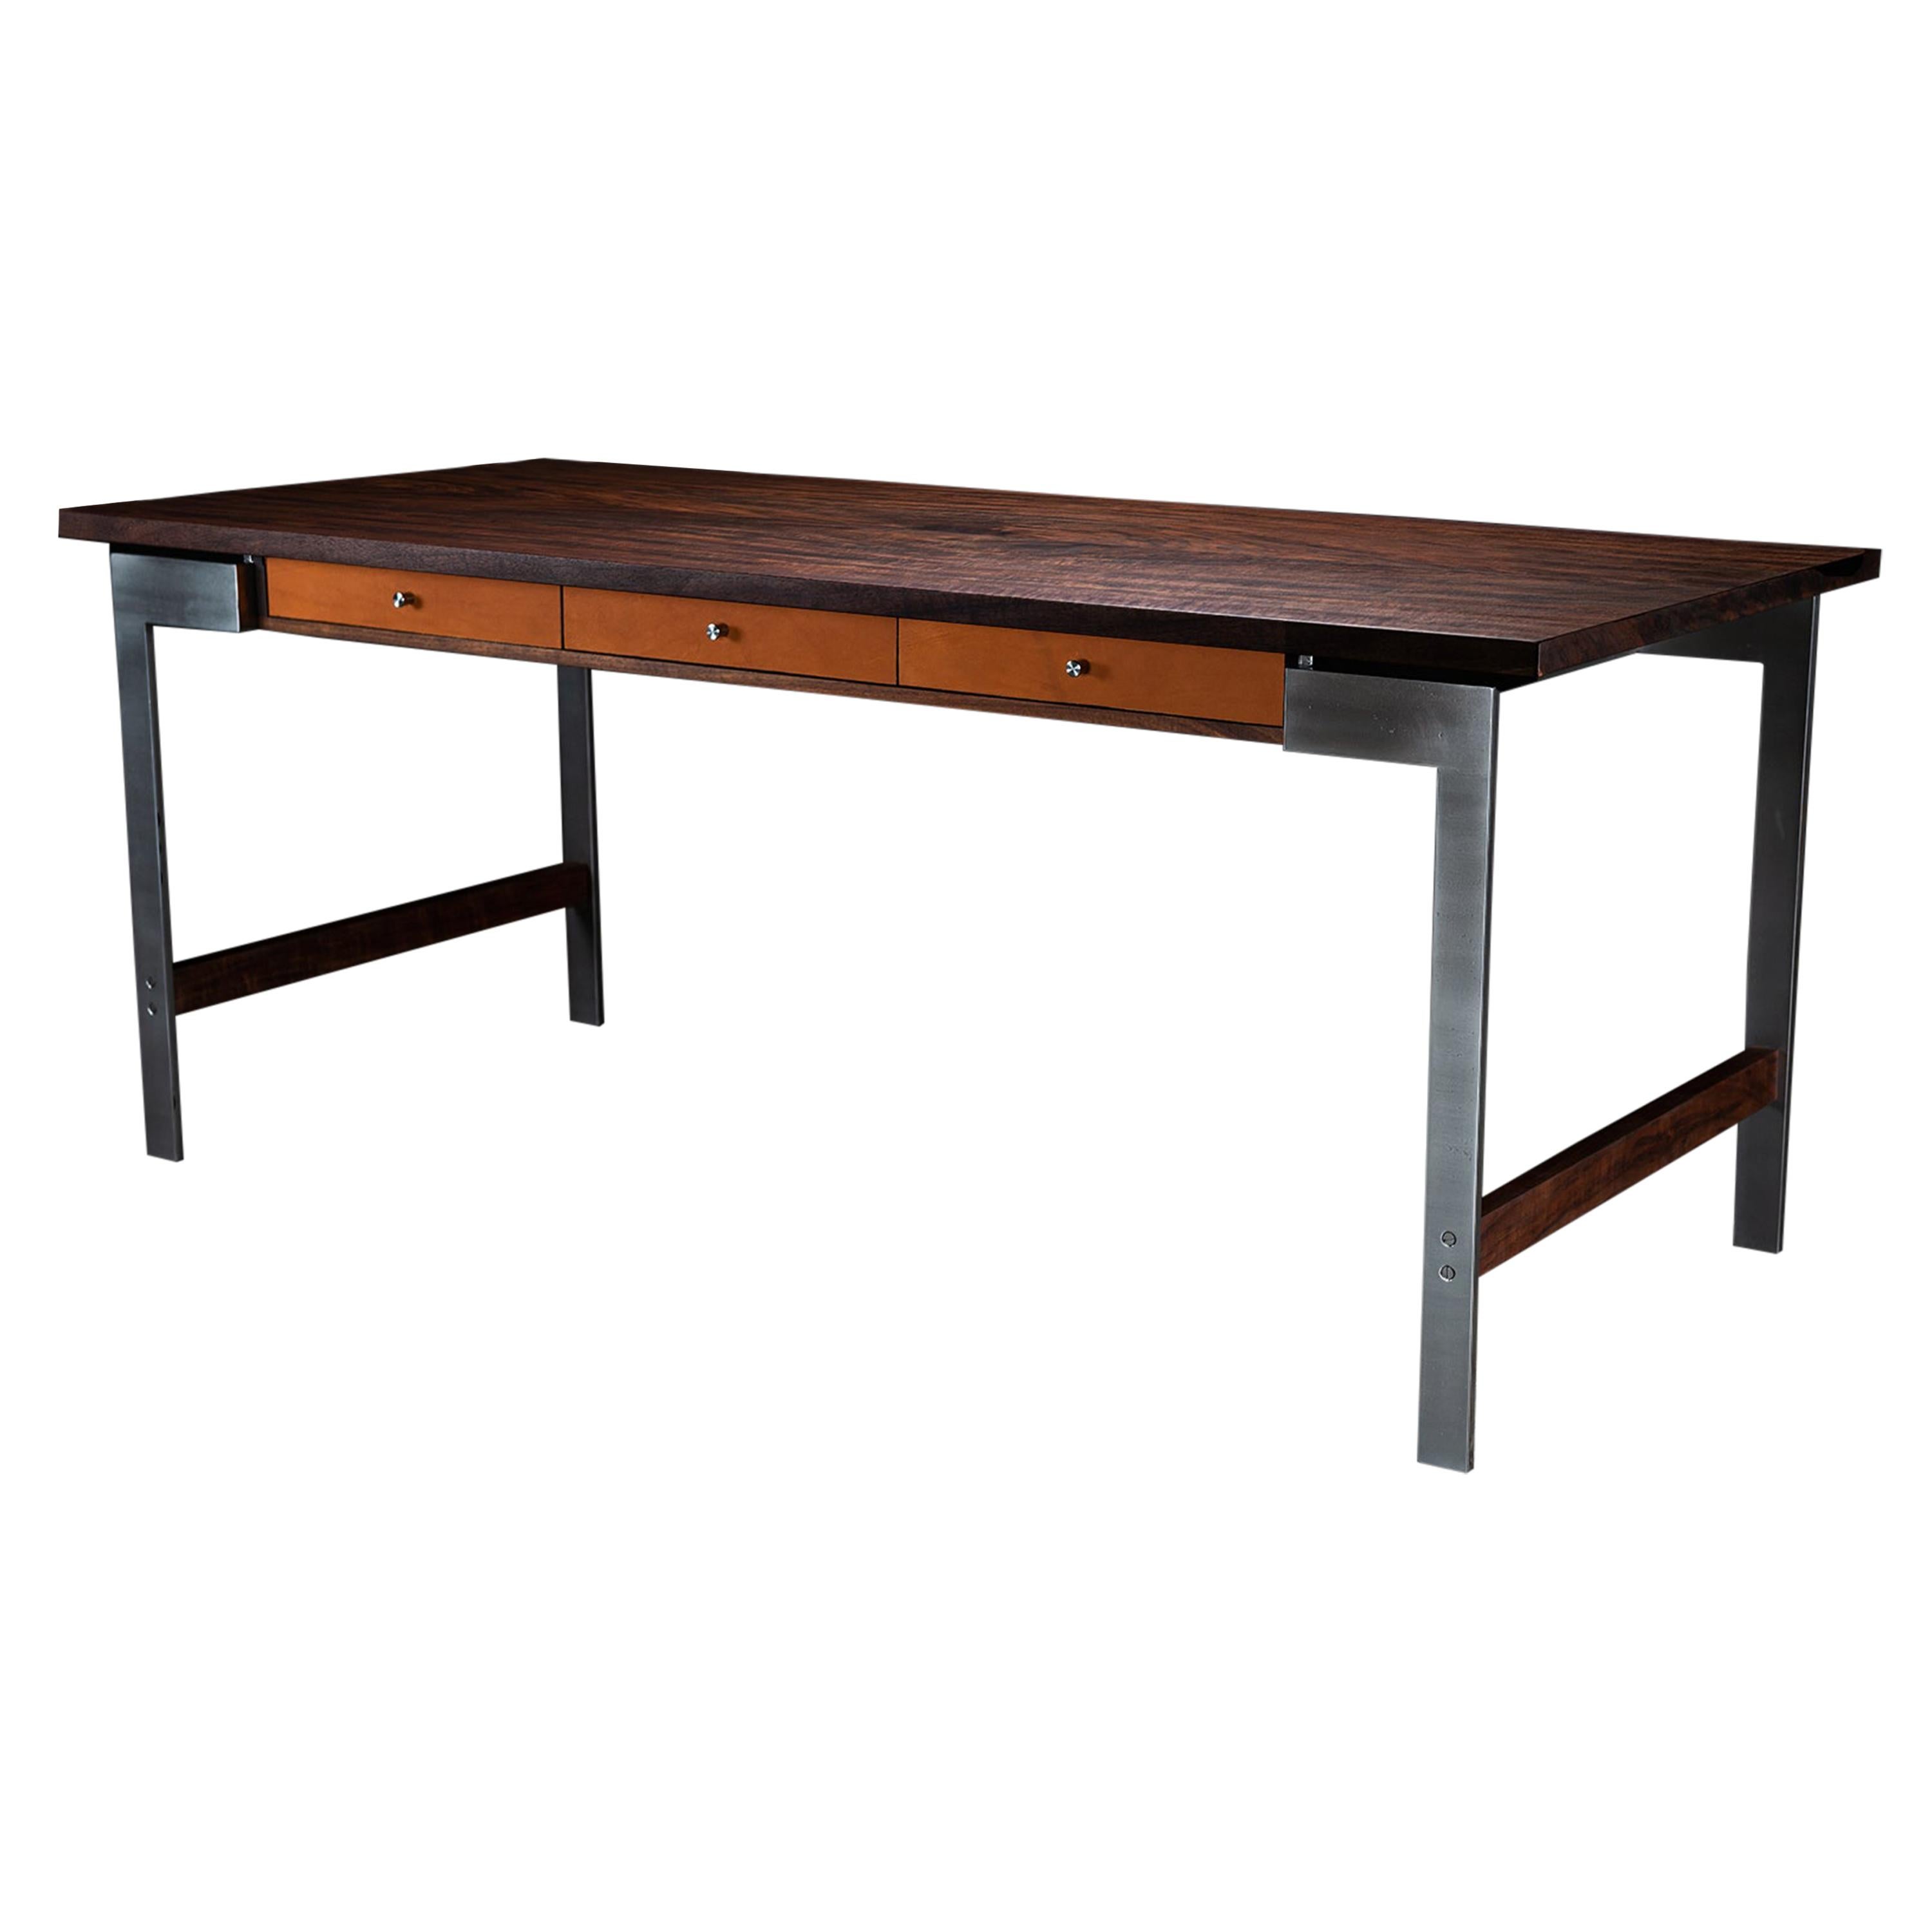 Pembroke Writing Desk by AMBROZIA, Claro Walnut, Stainless Steel, Camel Leather For Sale